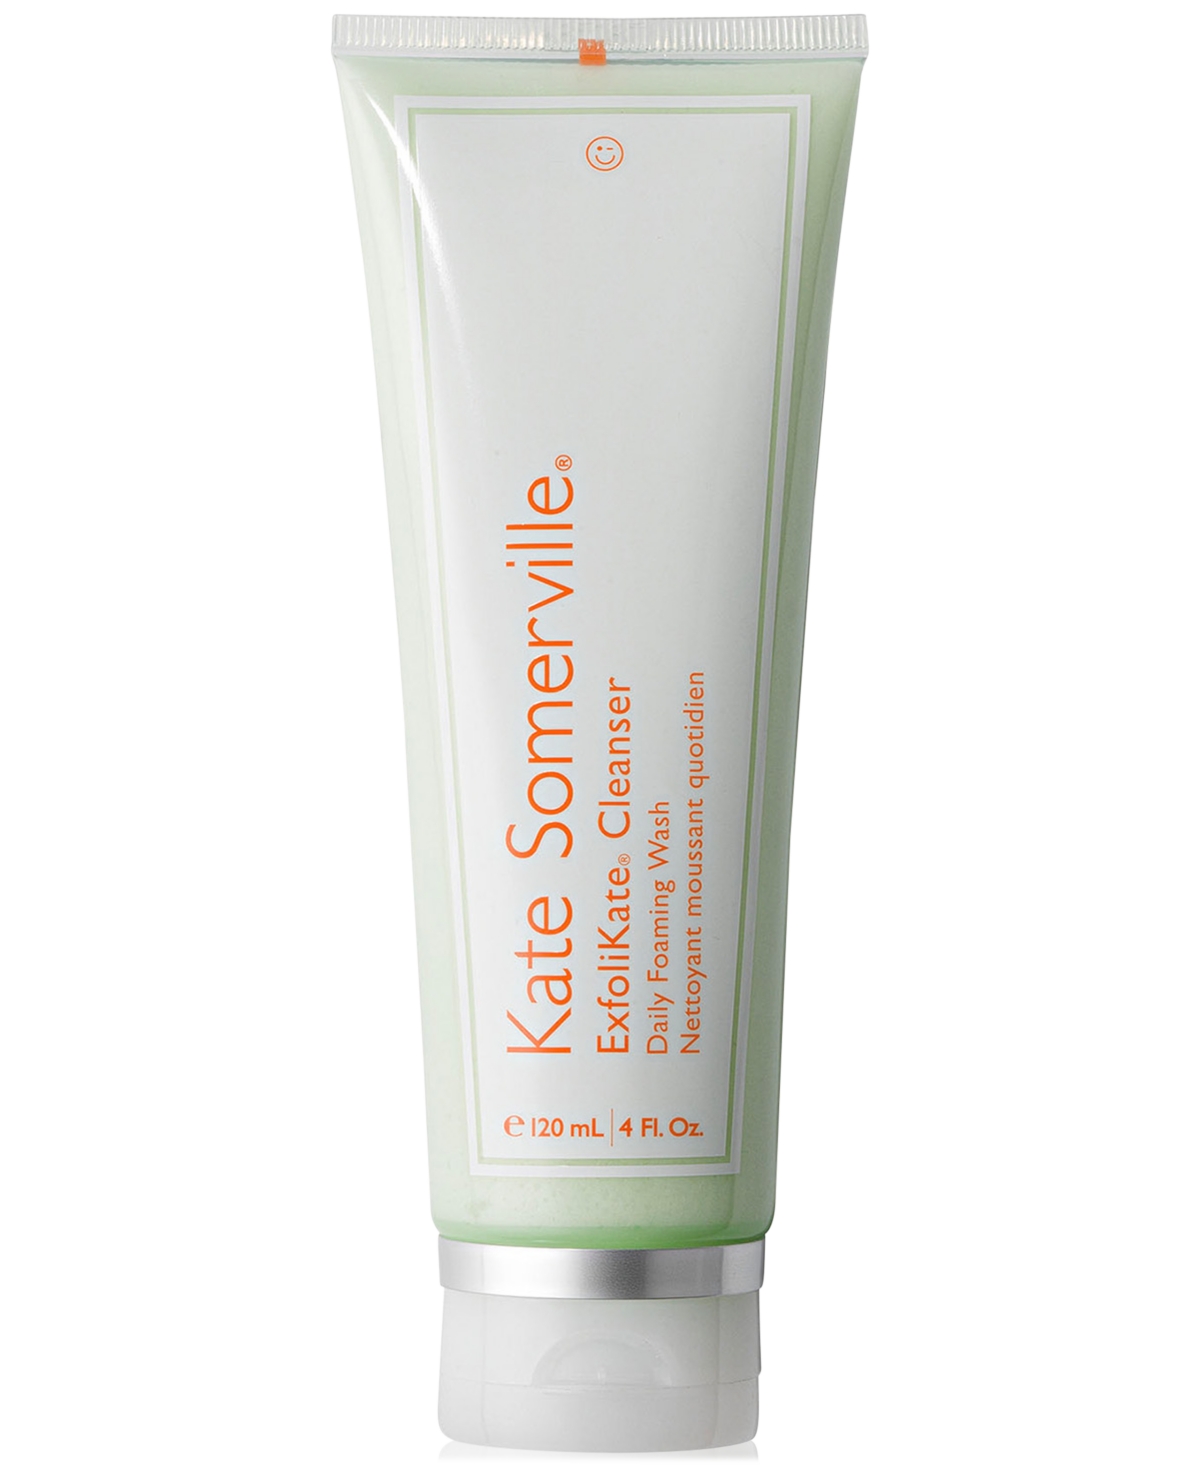 Kate Somerville Exfolikate Cleanser Daily Foaming Wash, 4 Oz. In No Color